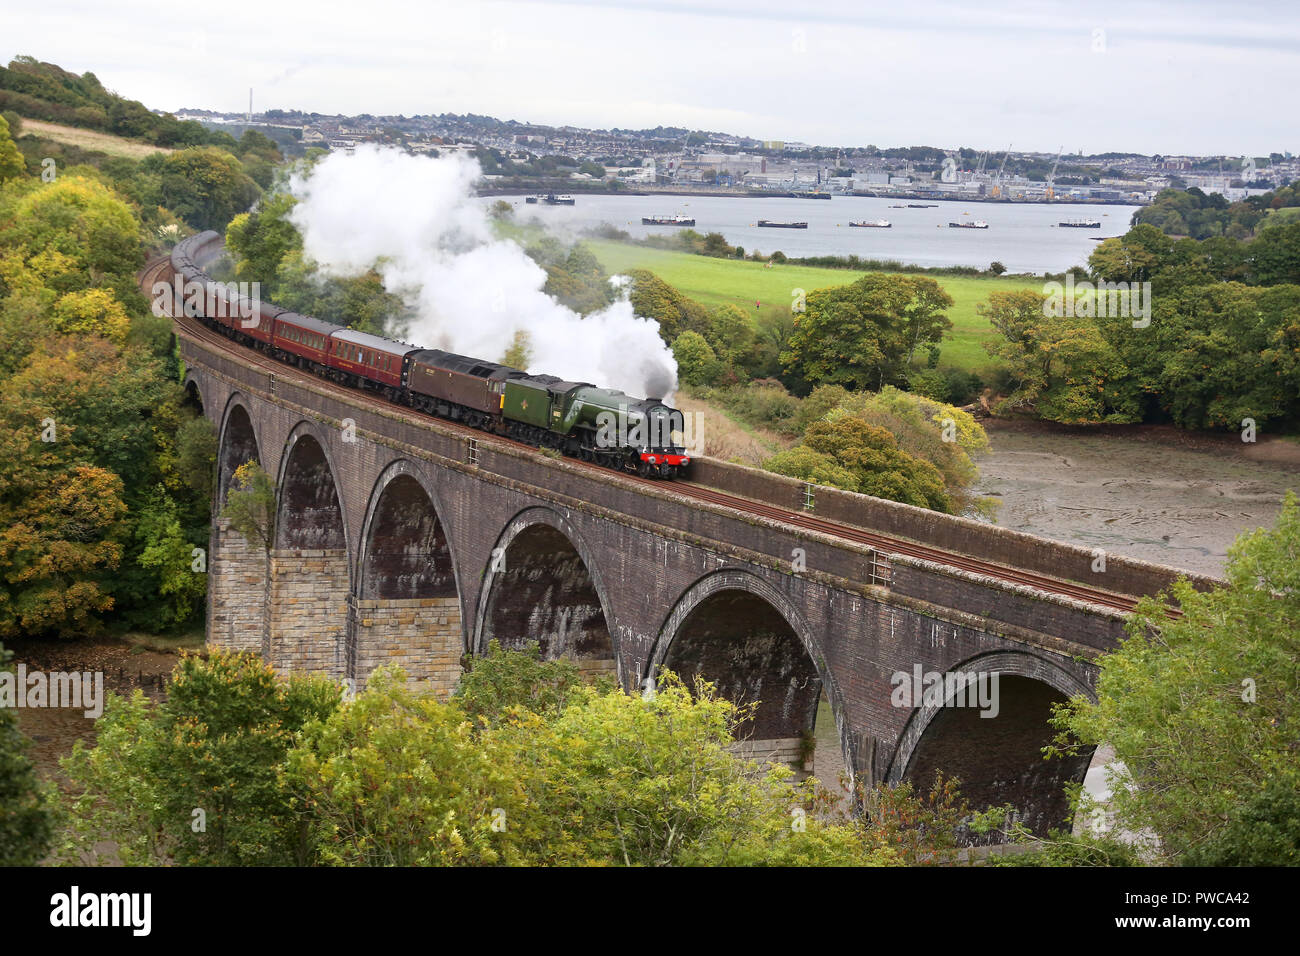 The magnificanrt sight of The Flying Scotsman entering the county of Cornwall for the first time in it's illustrious history. Stock Photo